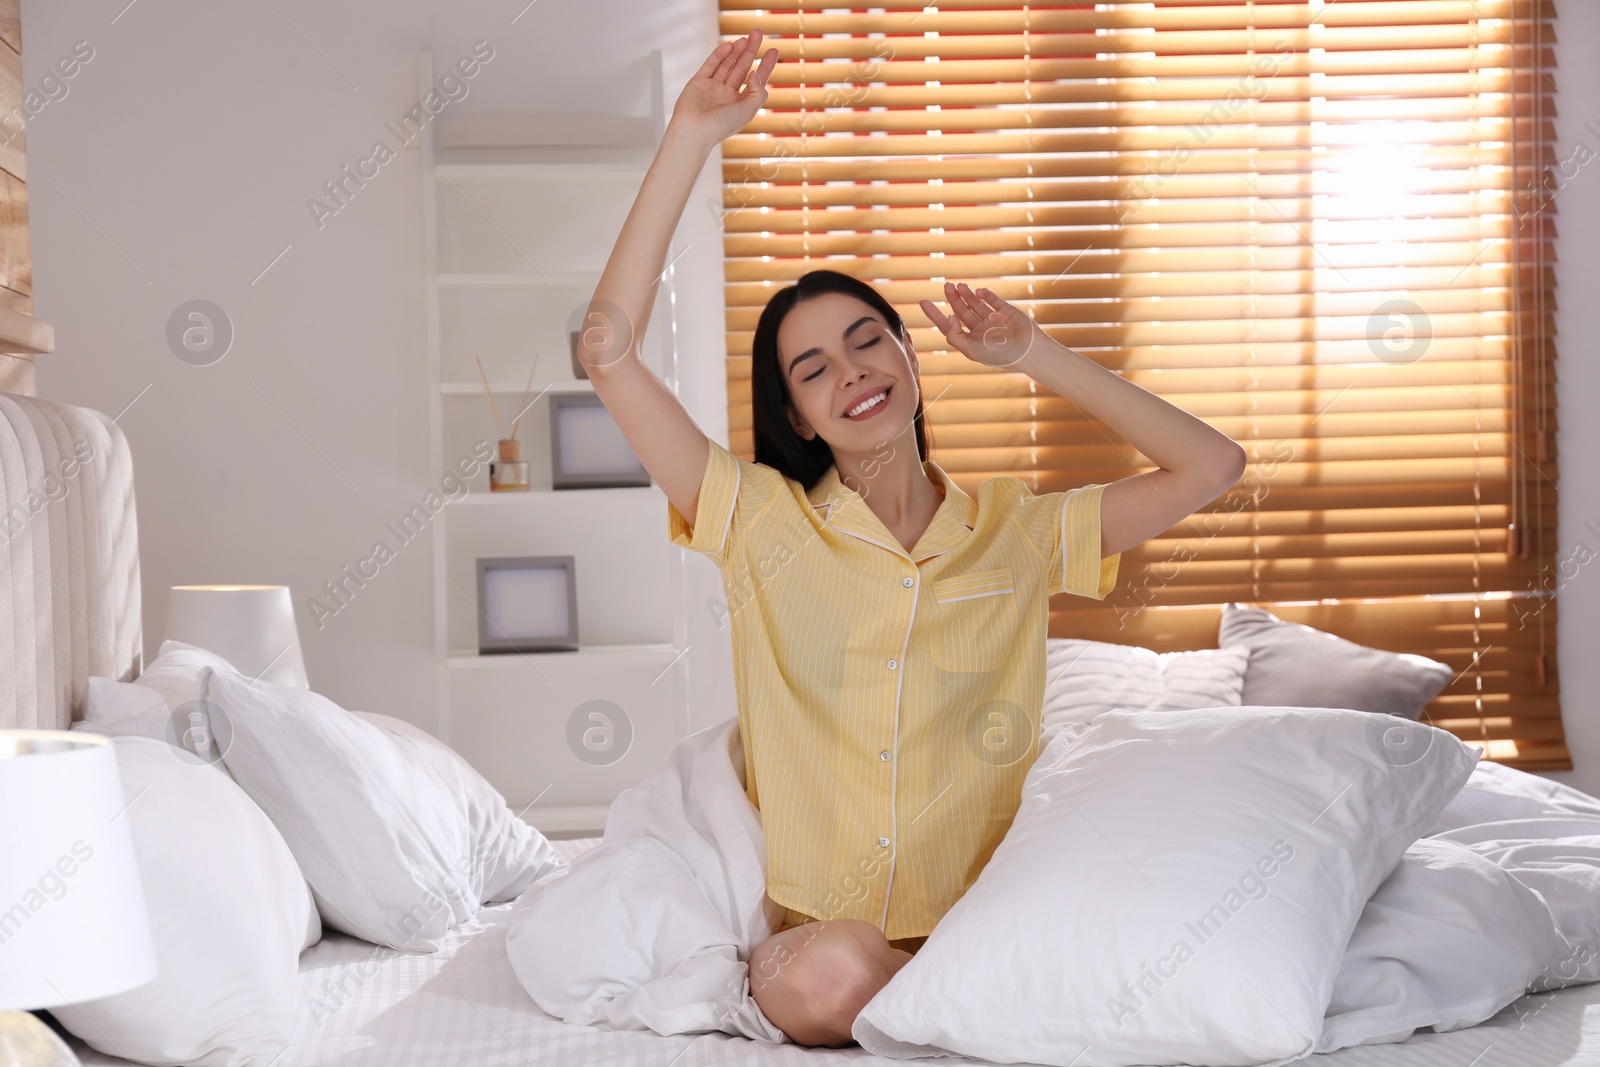 Photo of Woman sitting on comfortable bed with white linens